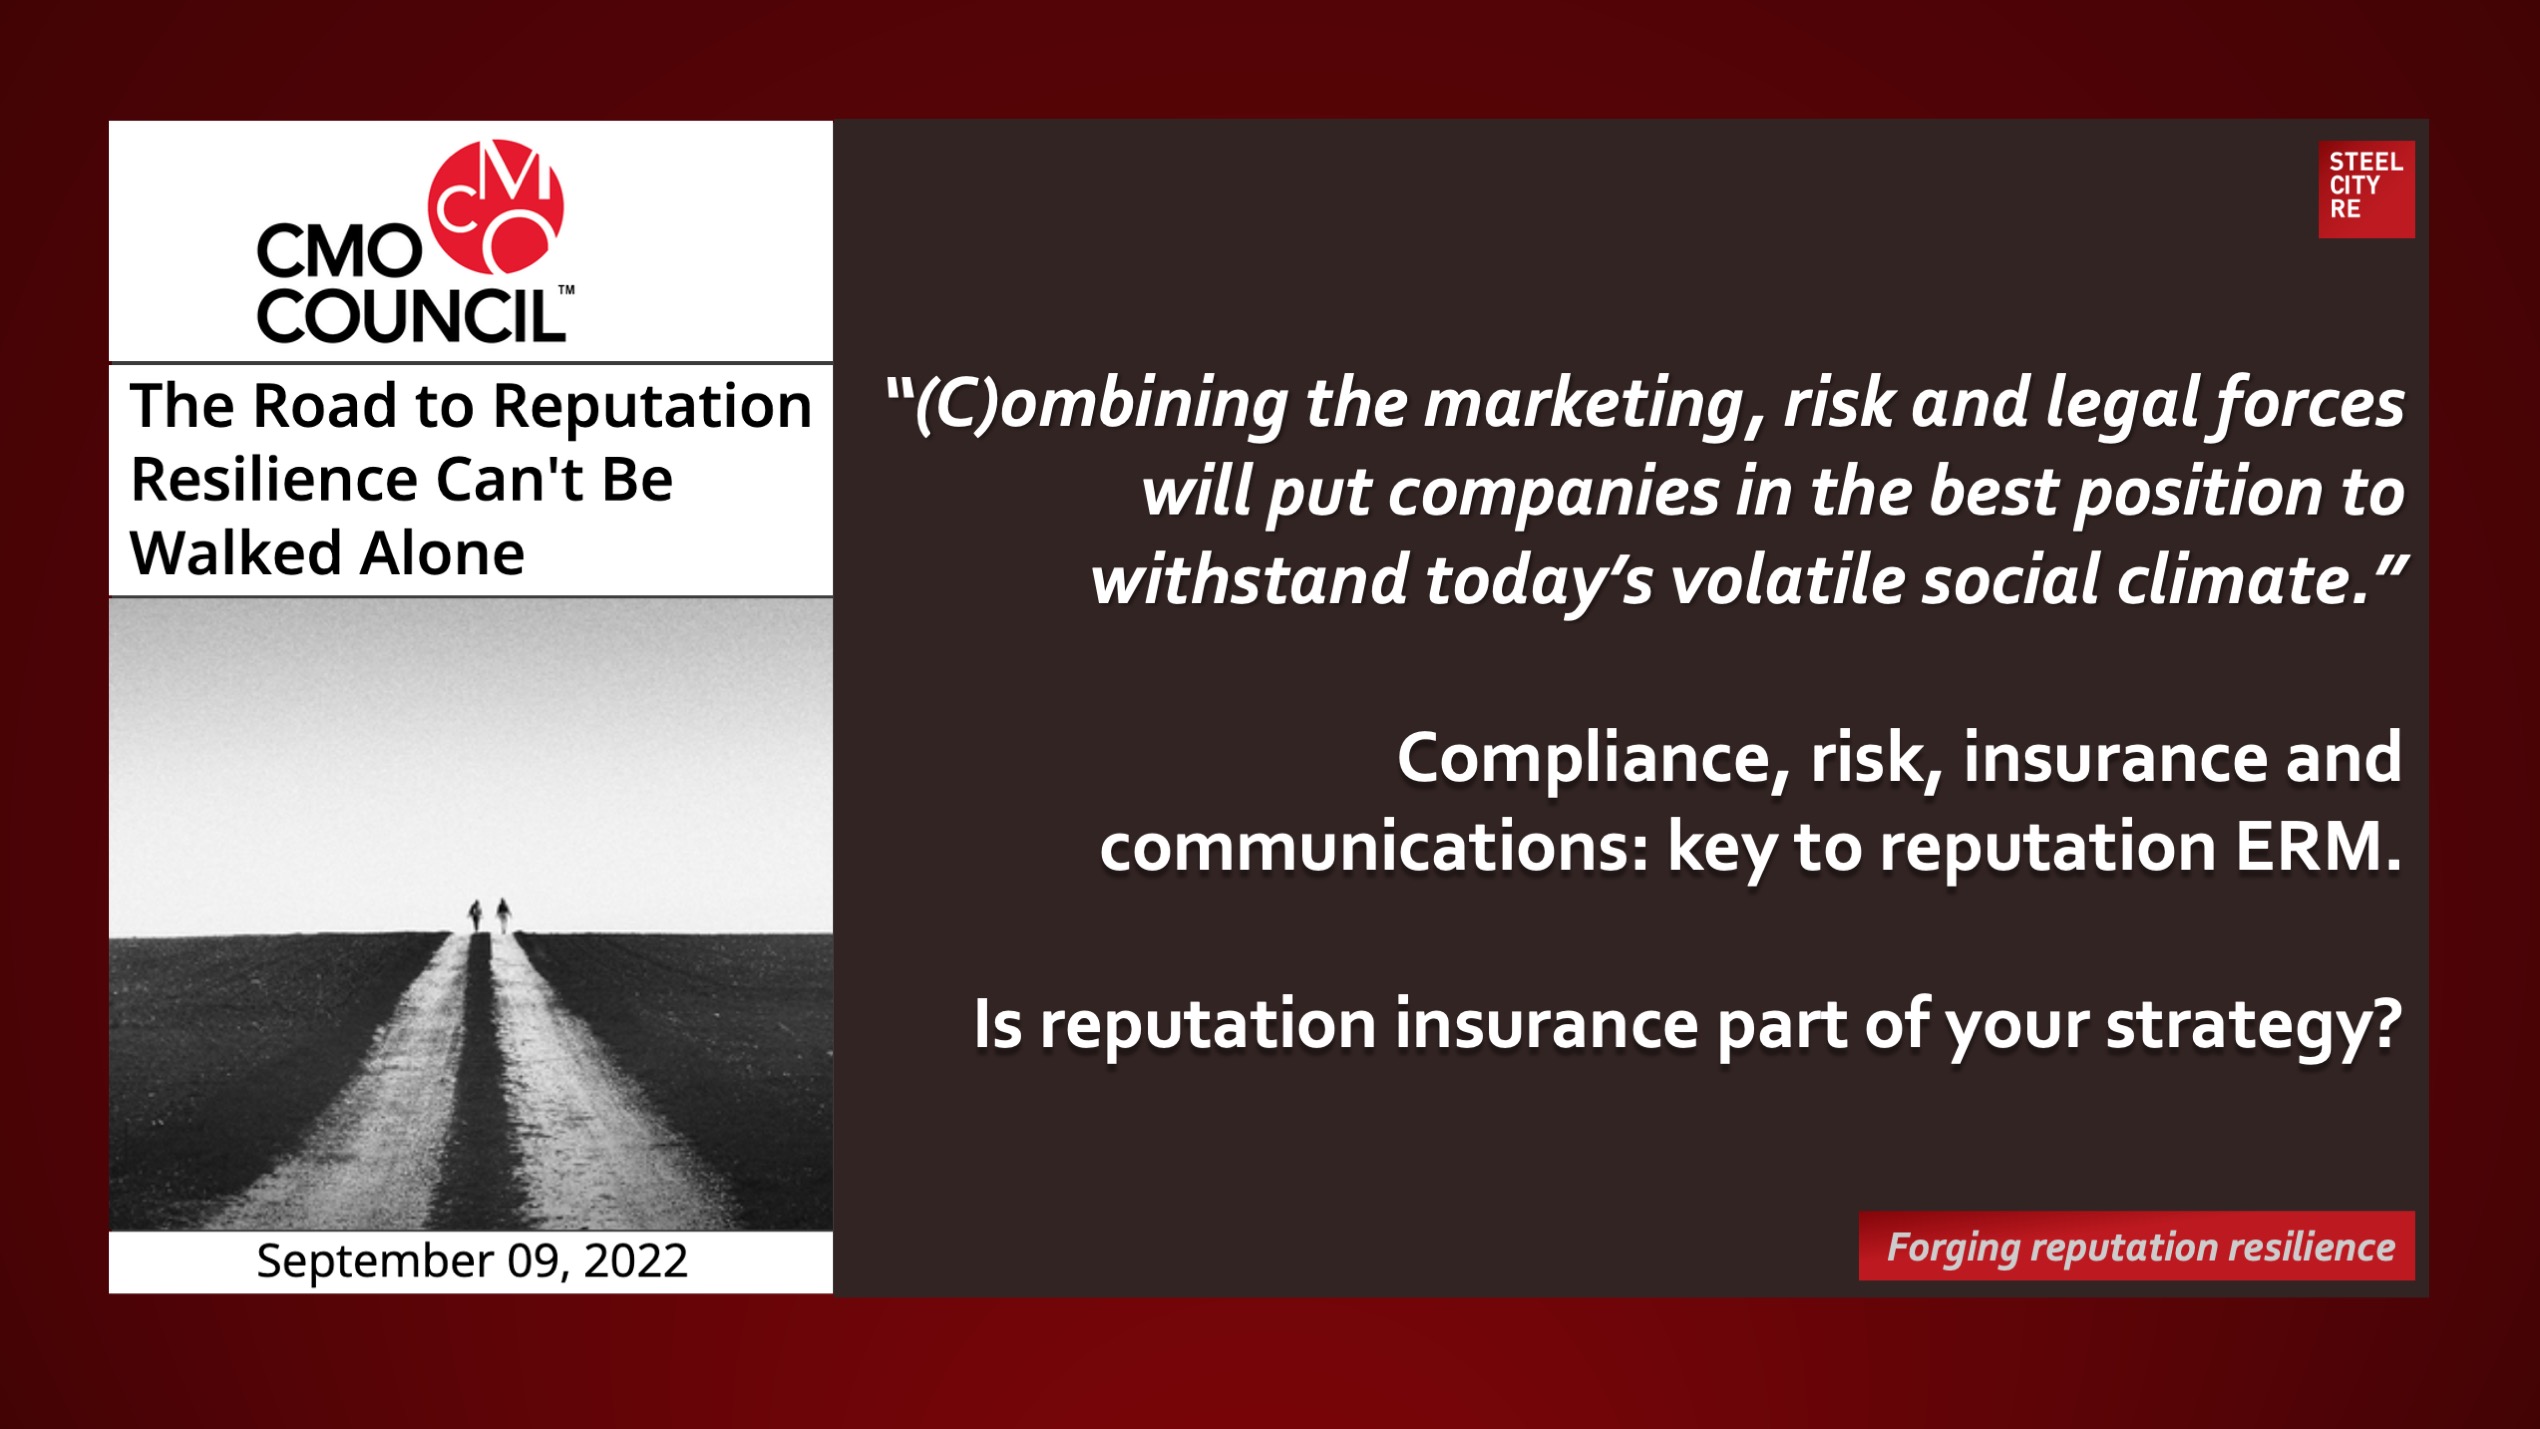 Road to reputation resilience. Combining the marketing, risk and legal forces will put companies in the best position to withstand today’s volatile social climate.